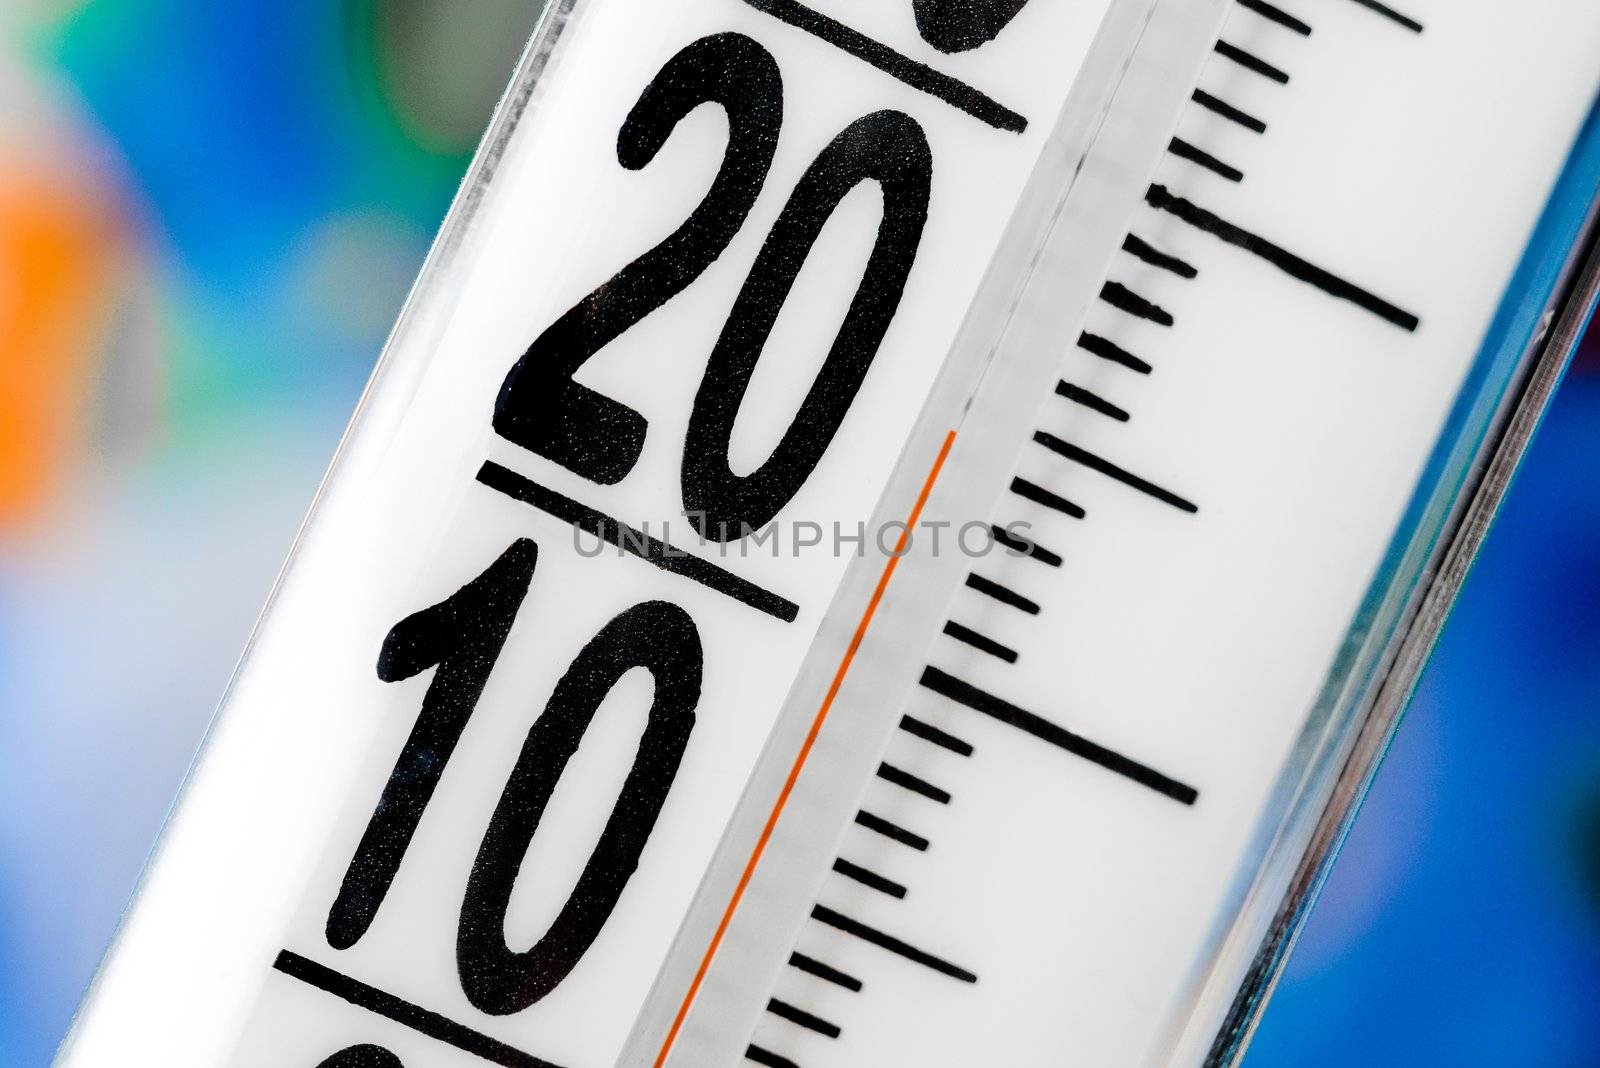 thermometer scale close up on a blur background